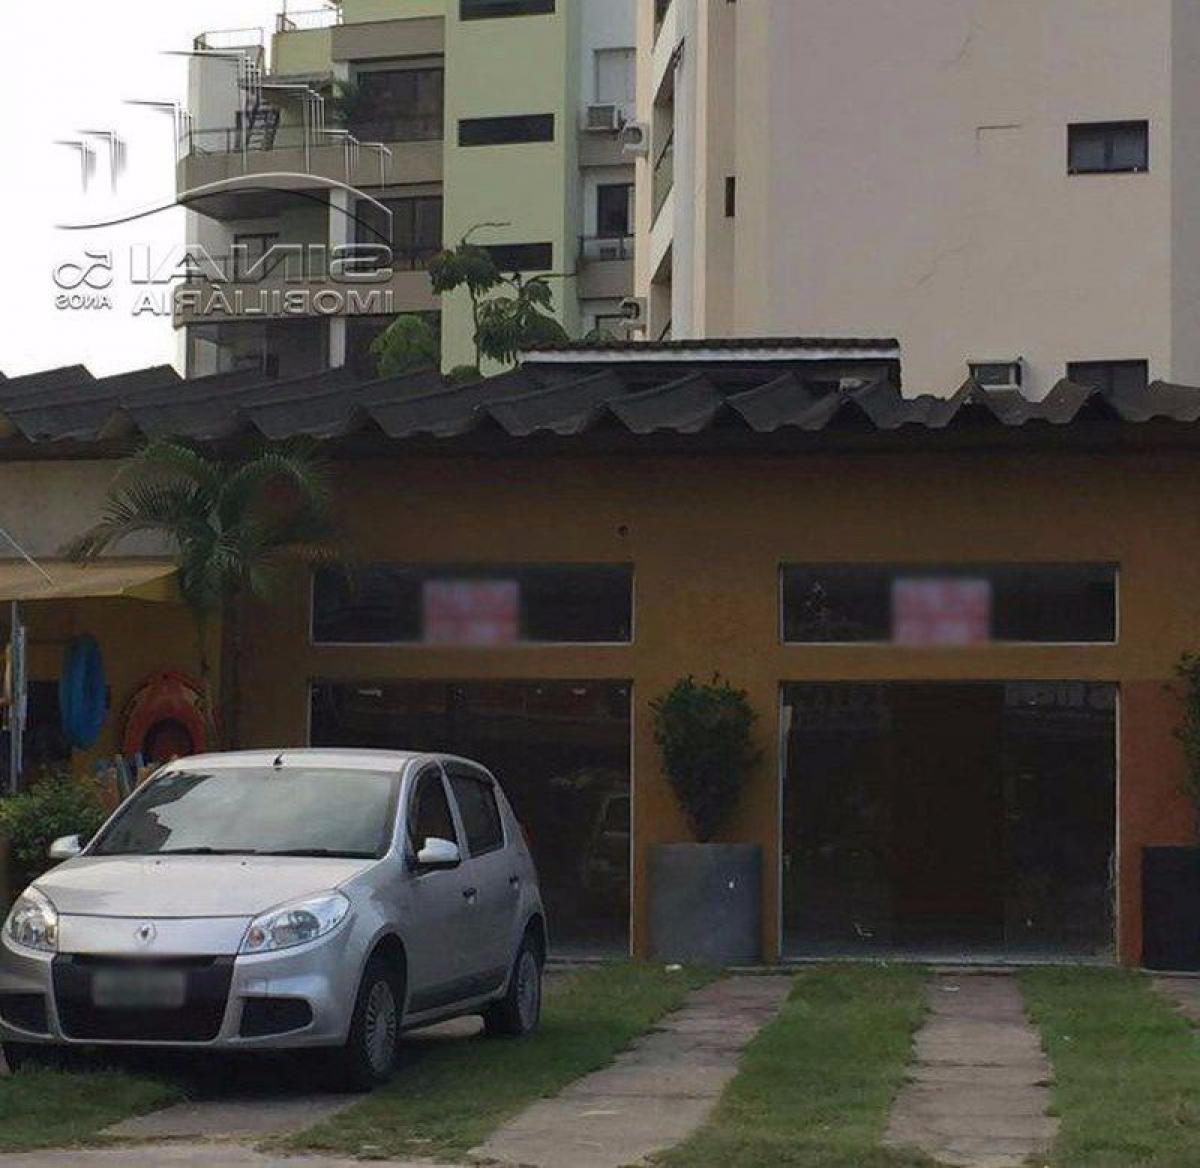 Picture of Commercial Building For Sale in Guaruja, Sao Paulo, Brazil